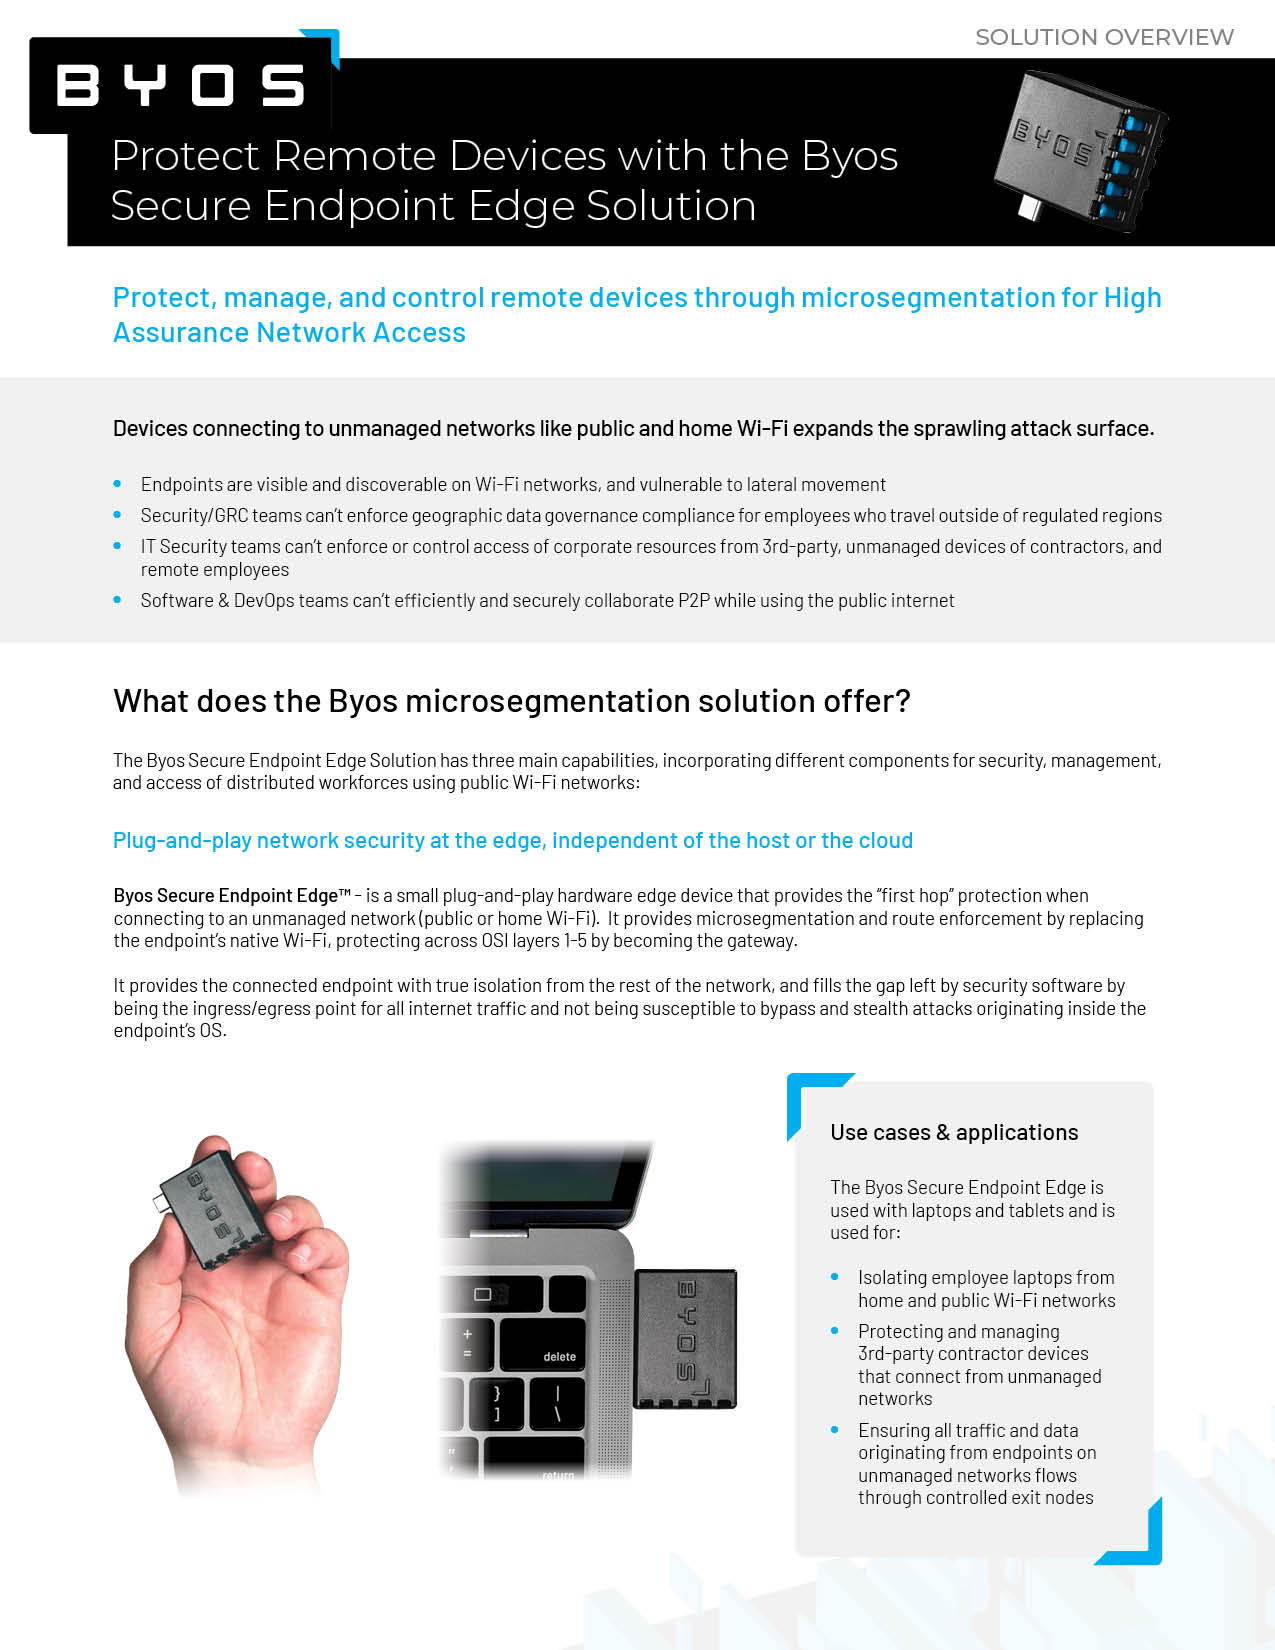 Byos Secure Endpoint Edge Overview thumbnail